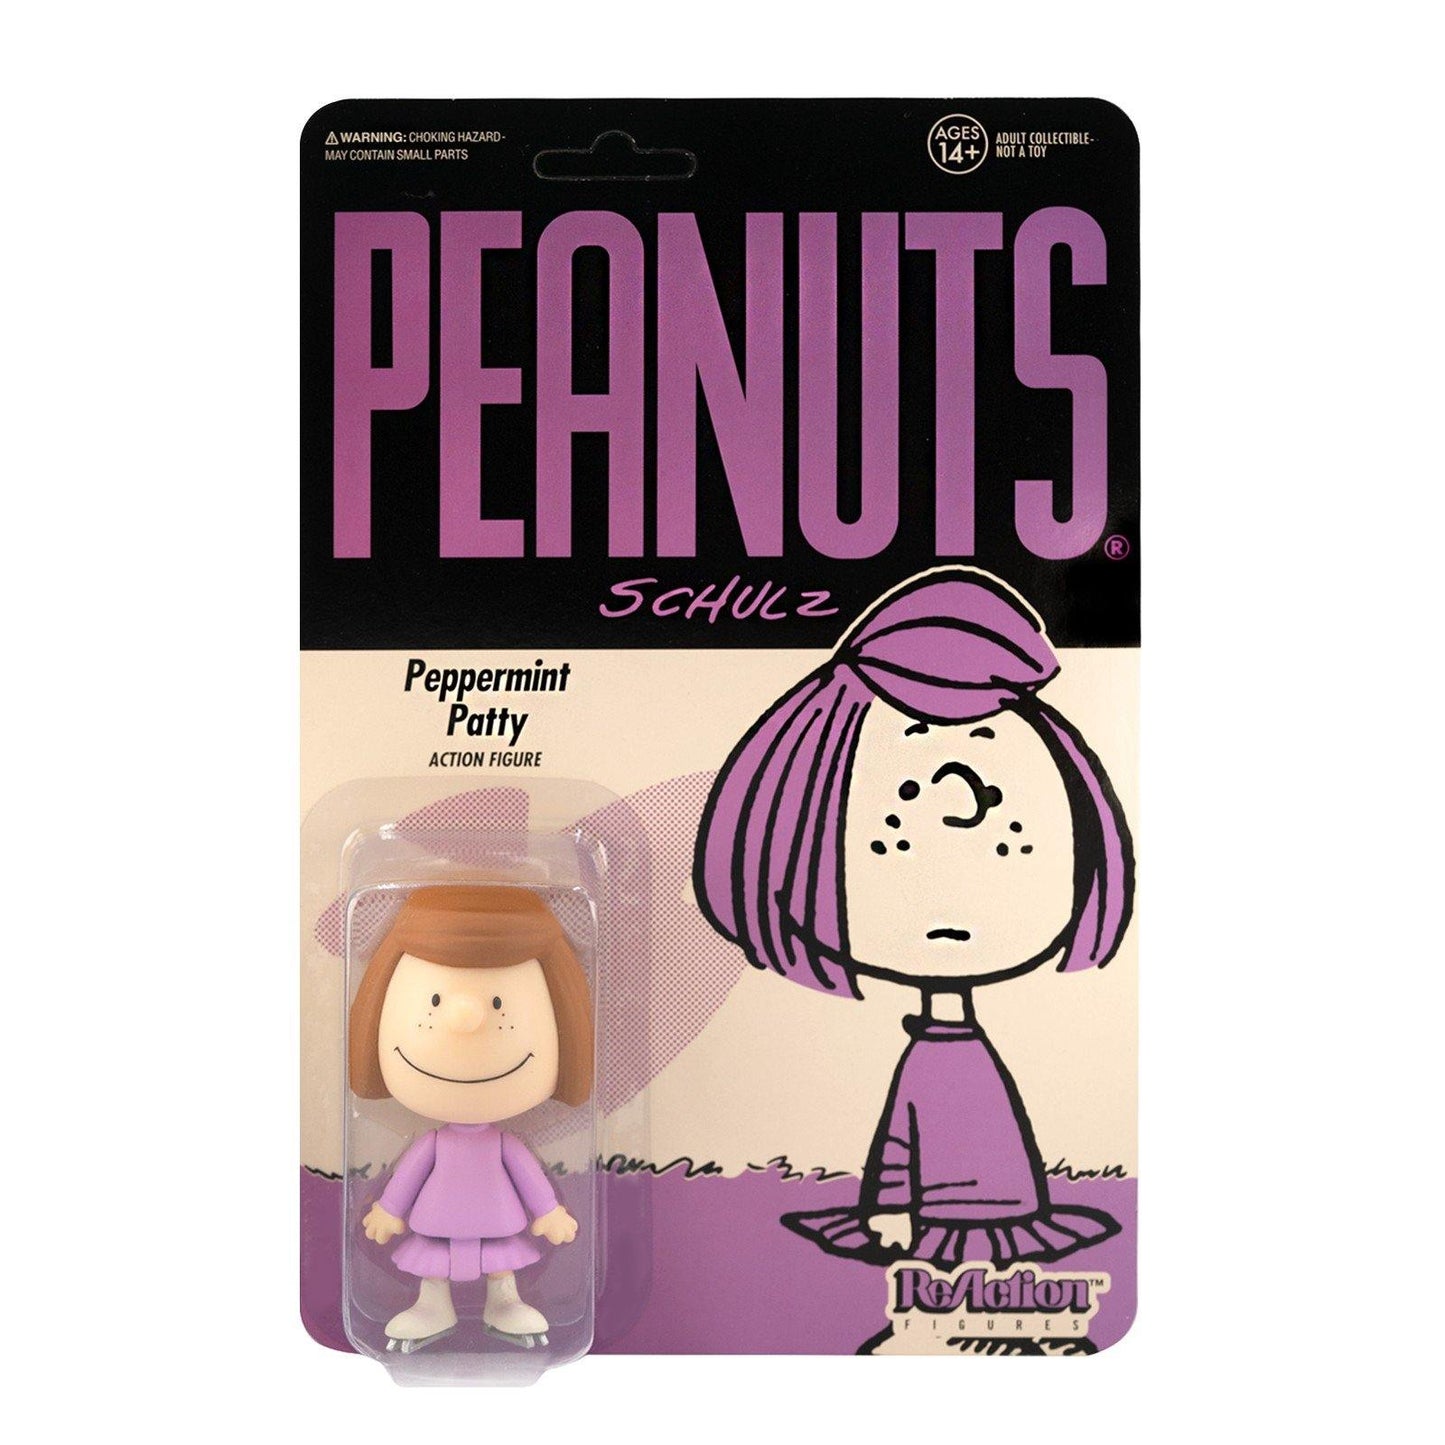 Peanuts Wave 2: Peppermint Patty ReAction Figure 8 cm - Peanuts, Peppermint Patty, Snoopy, super7 - Gadgetz Home